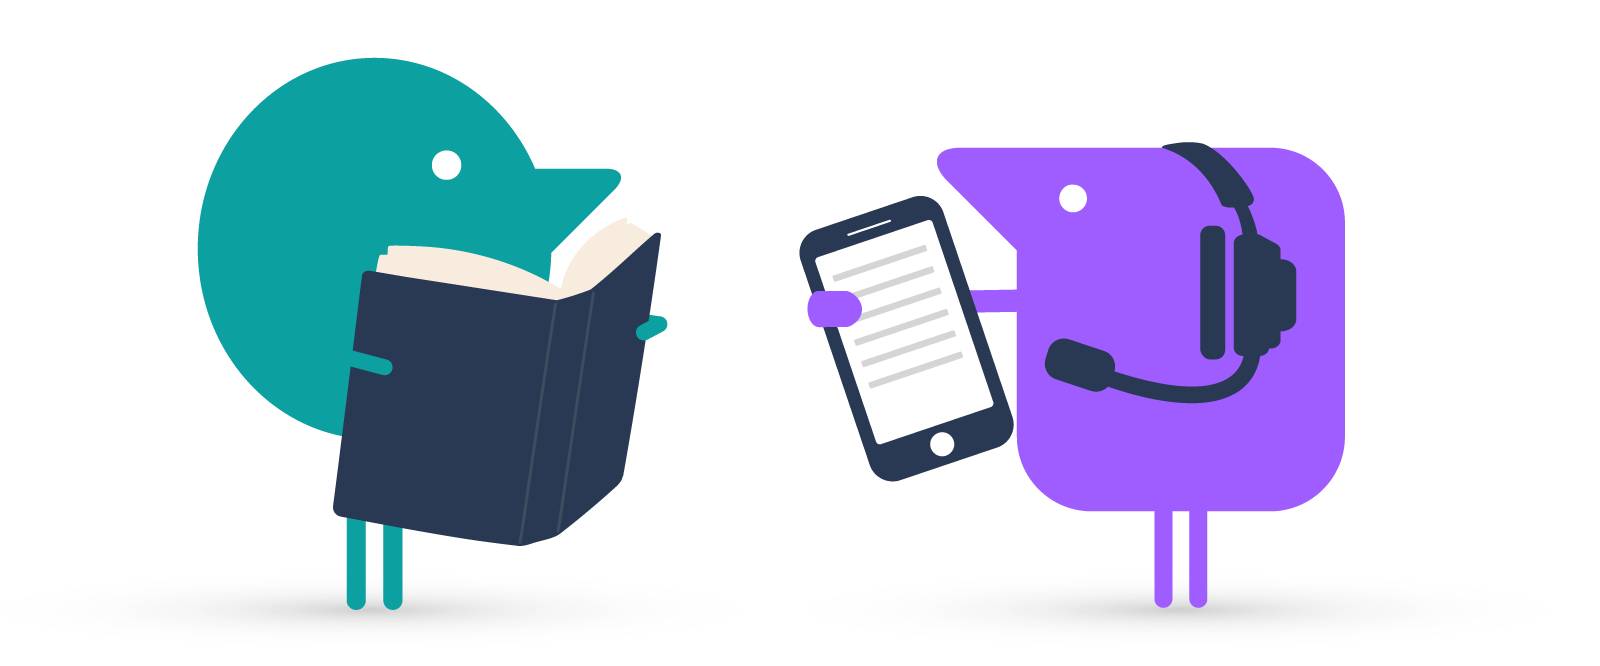 Texthelper cartoon characters reading from a book and a mobile device